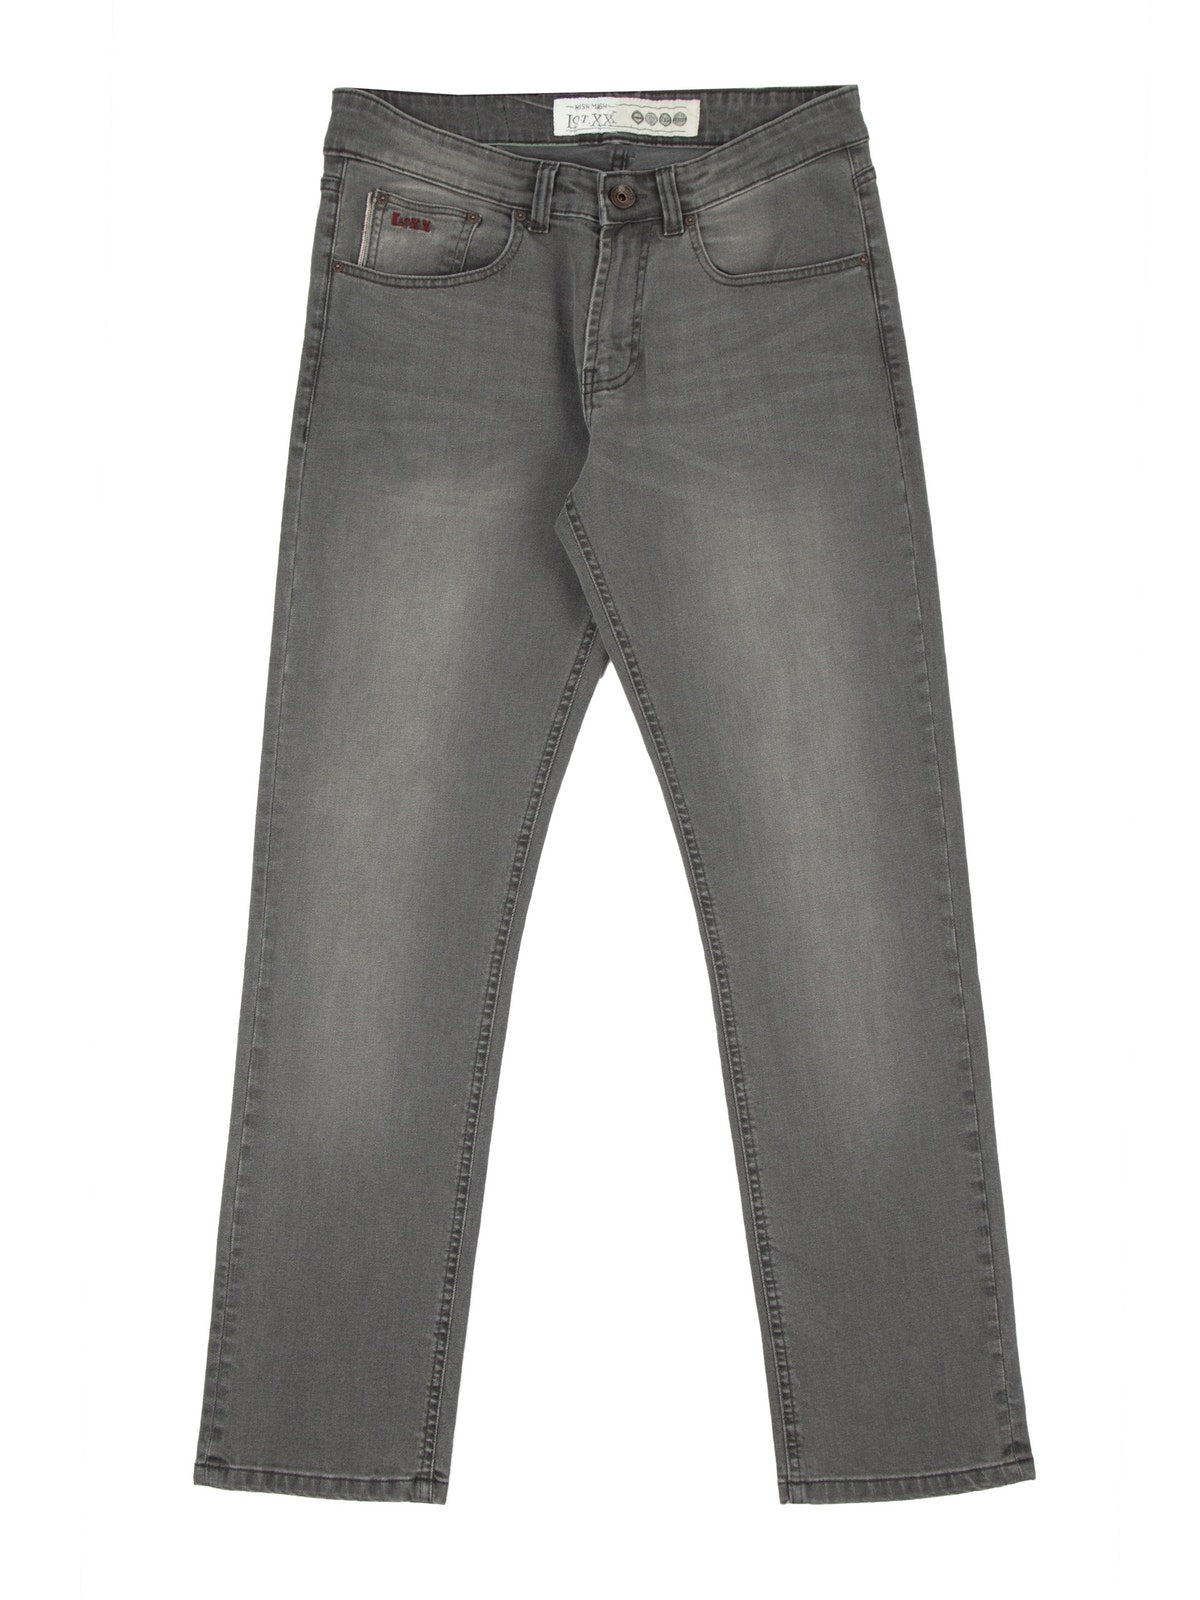 'Ocean' Straight Fit Stretch Jeans